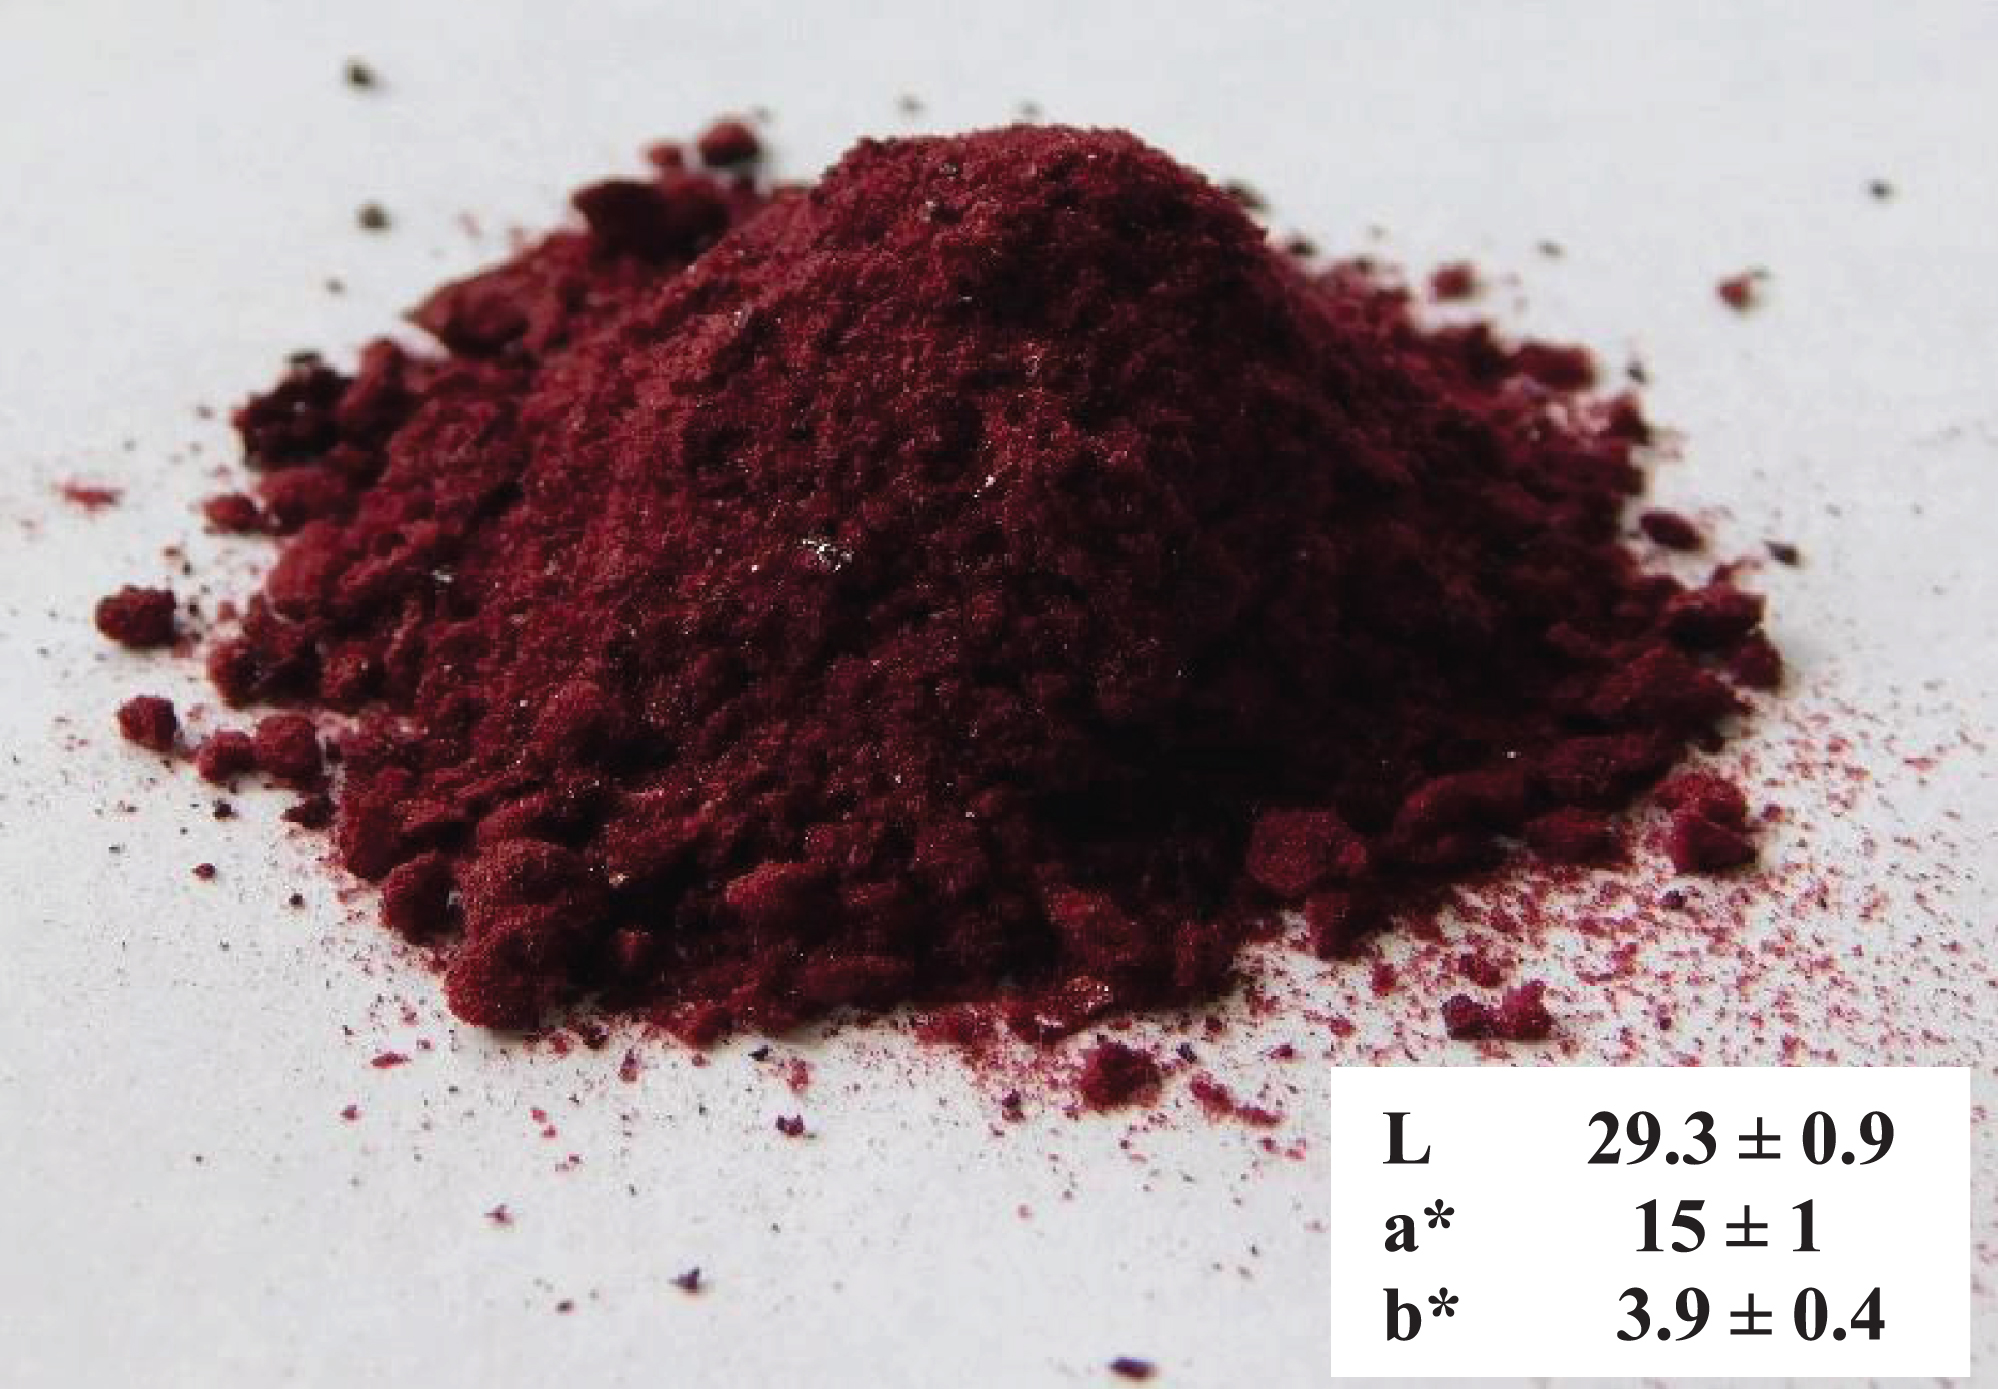 Elderberry freeze-dried powder appearance and CIELab parameters.